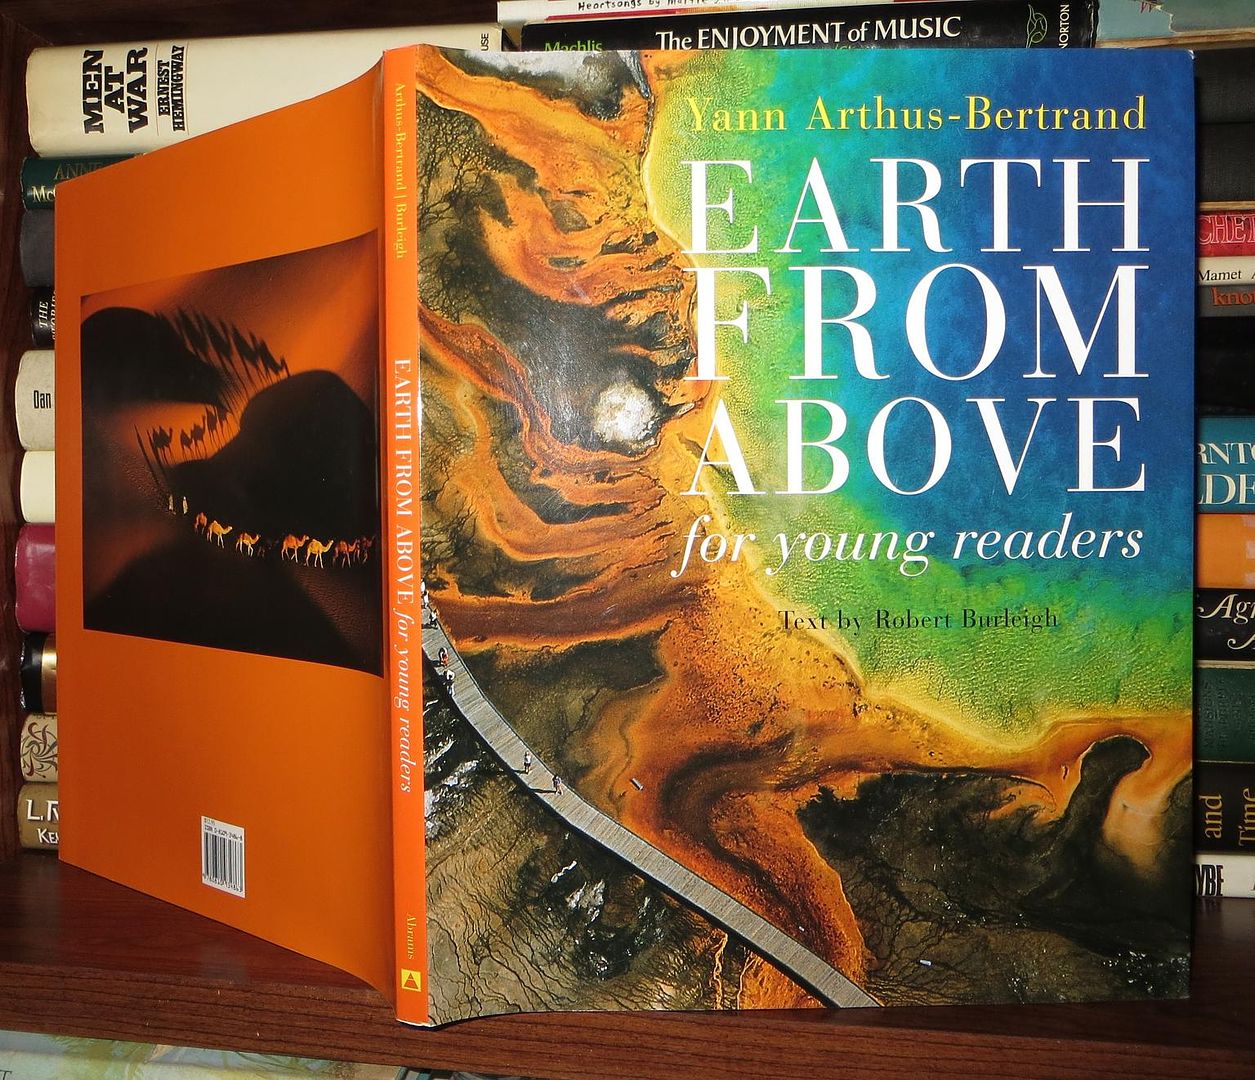 ARTHUS-BERTRAND, YANN & TEXT ROBERT BURLEIGH - Earth from Above for Young Readers